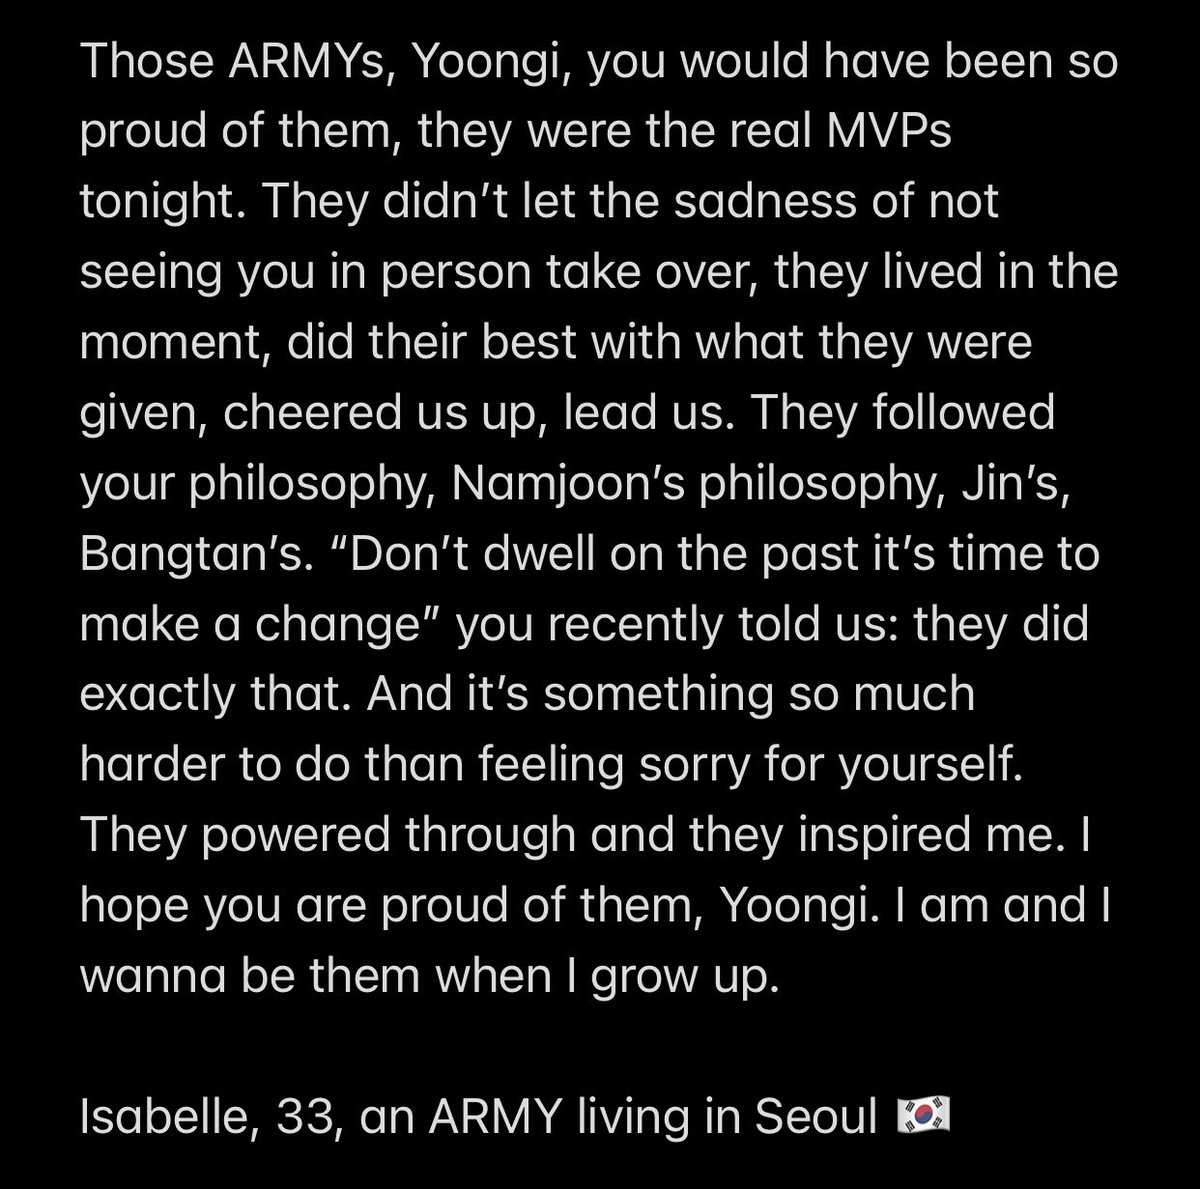 An open letter to Min Yoongi 💌 — This is what happened outside of your concert while you were performing tonight in Seoul.

PS: if you read until the end, it gets magical. 💜 (And yes, I have 7% of battery left: it’s the 7 again.)

@BTS_twt #AgustD_SUGA_Tour_in_Seoul